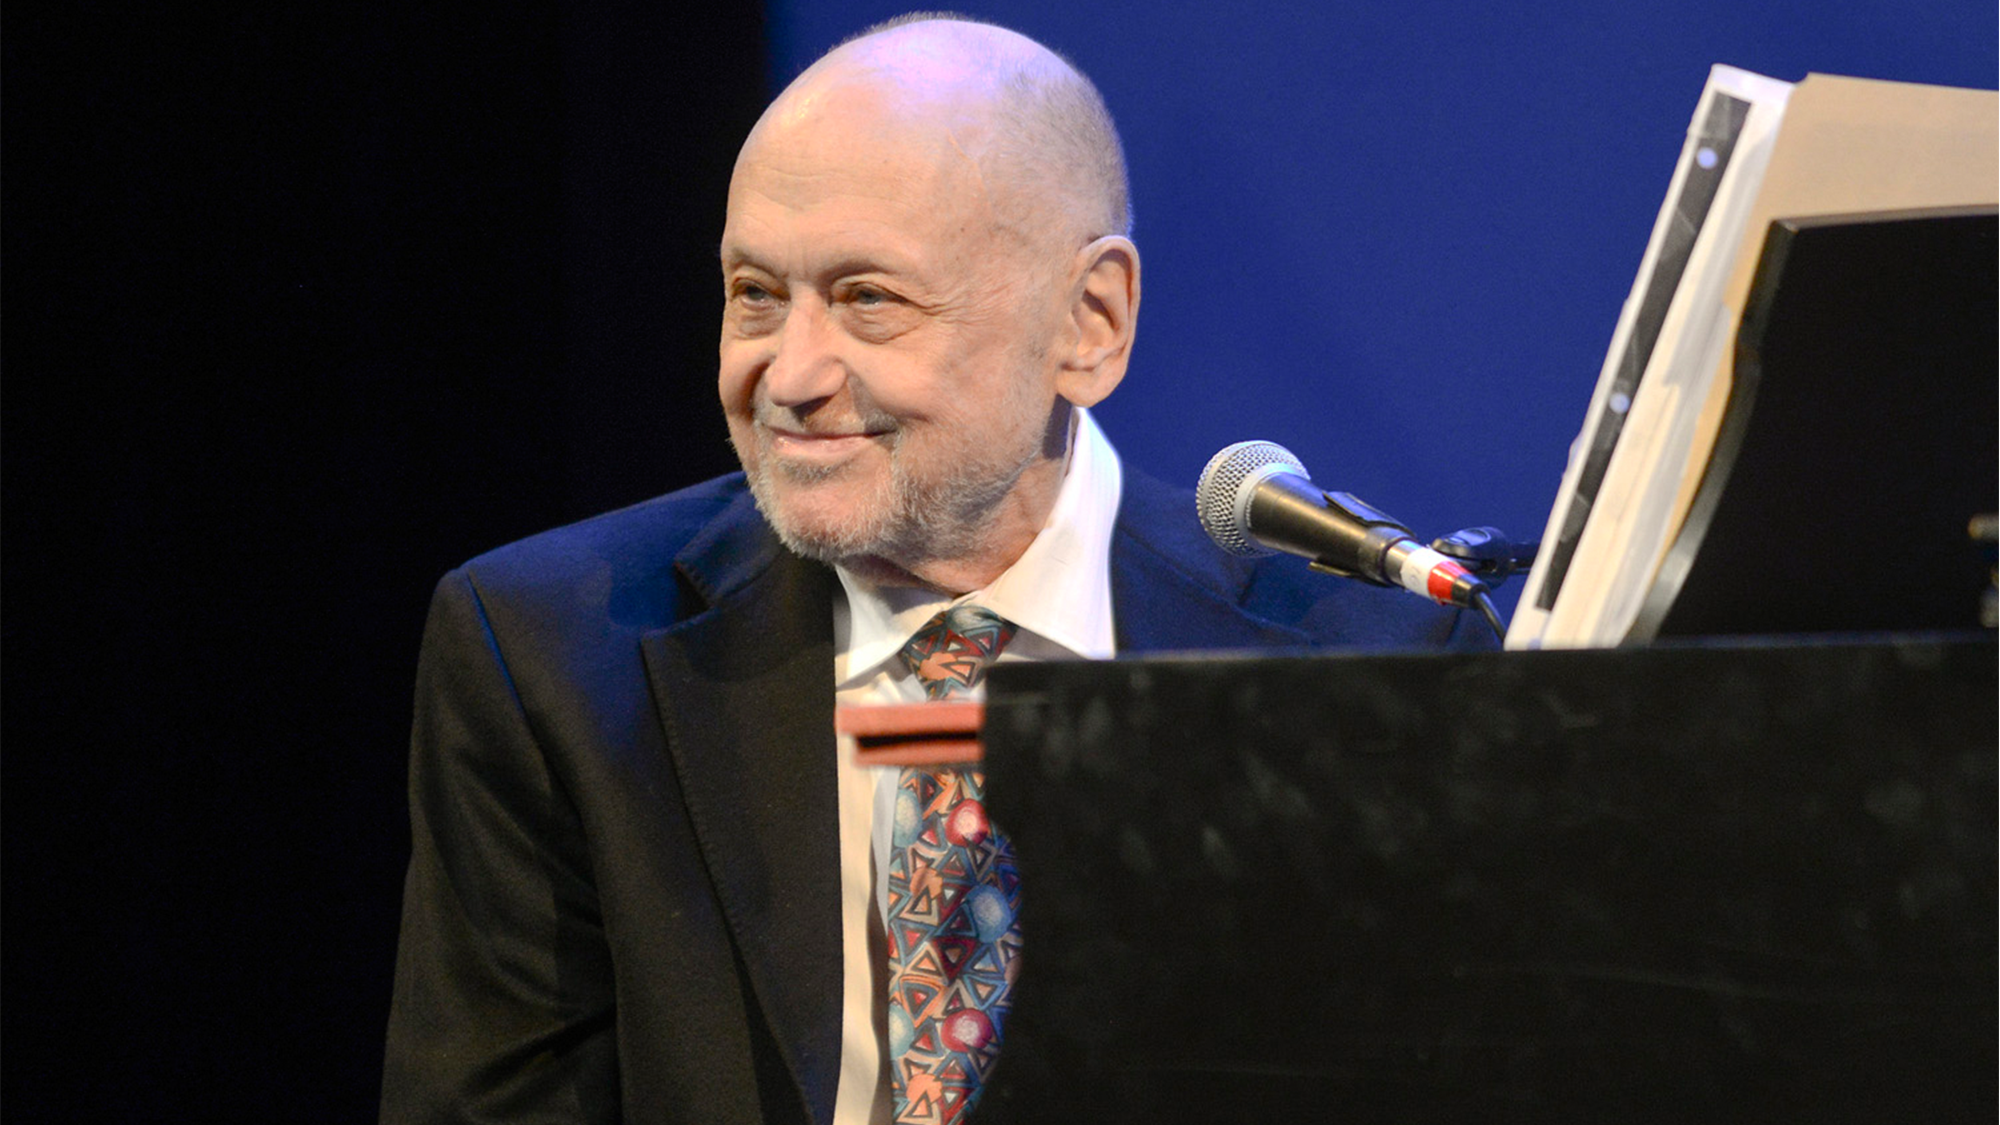 Charles Strouse